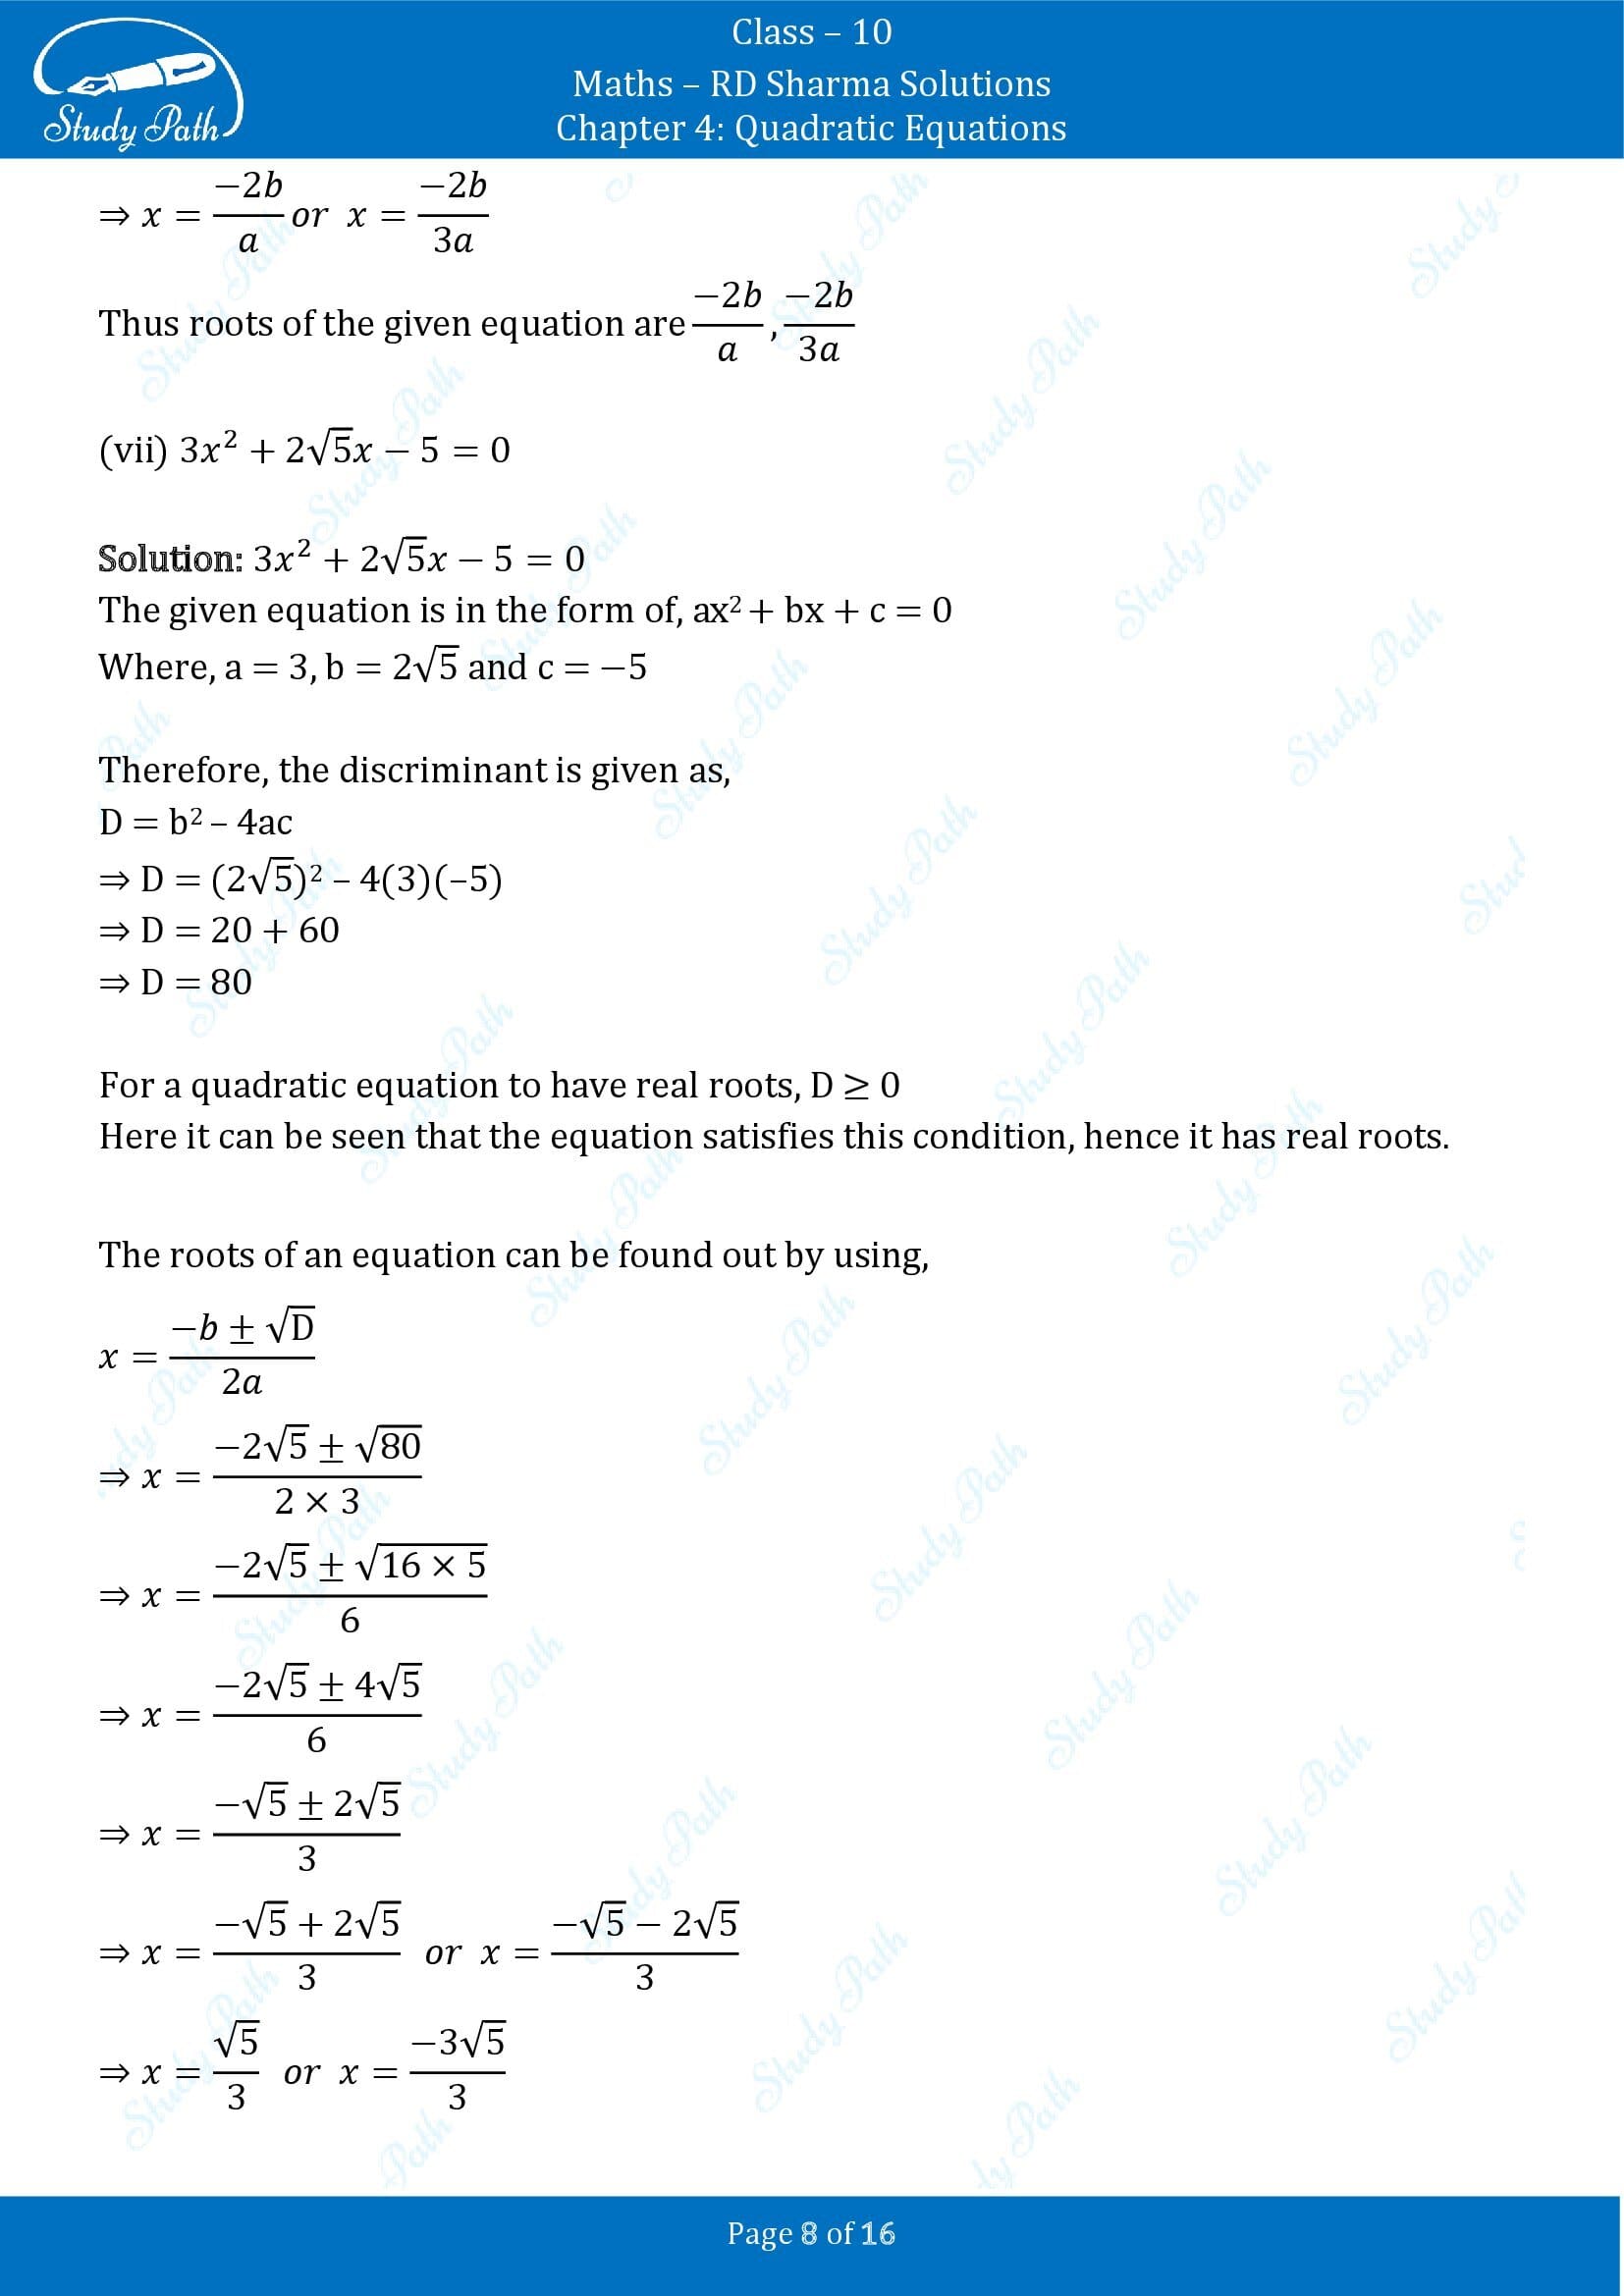 RD Sharma Solutions Class 10 Chapter 4 Quadratic Equations Exercise 4.5 00008